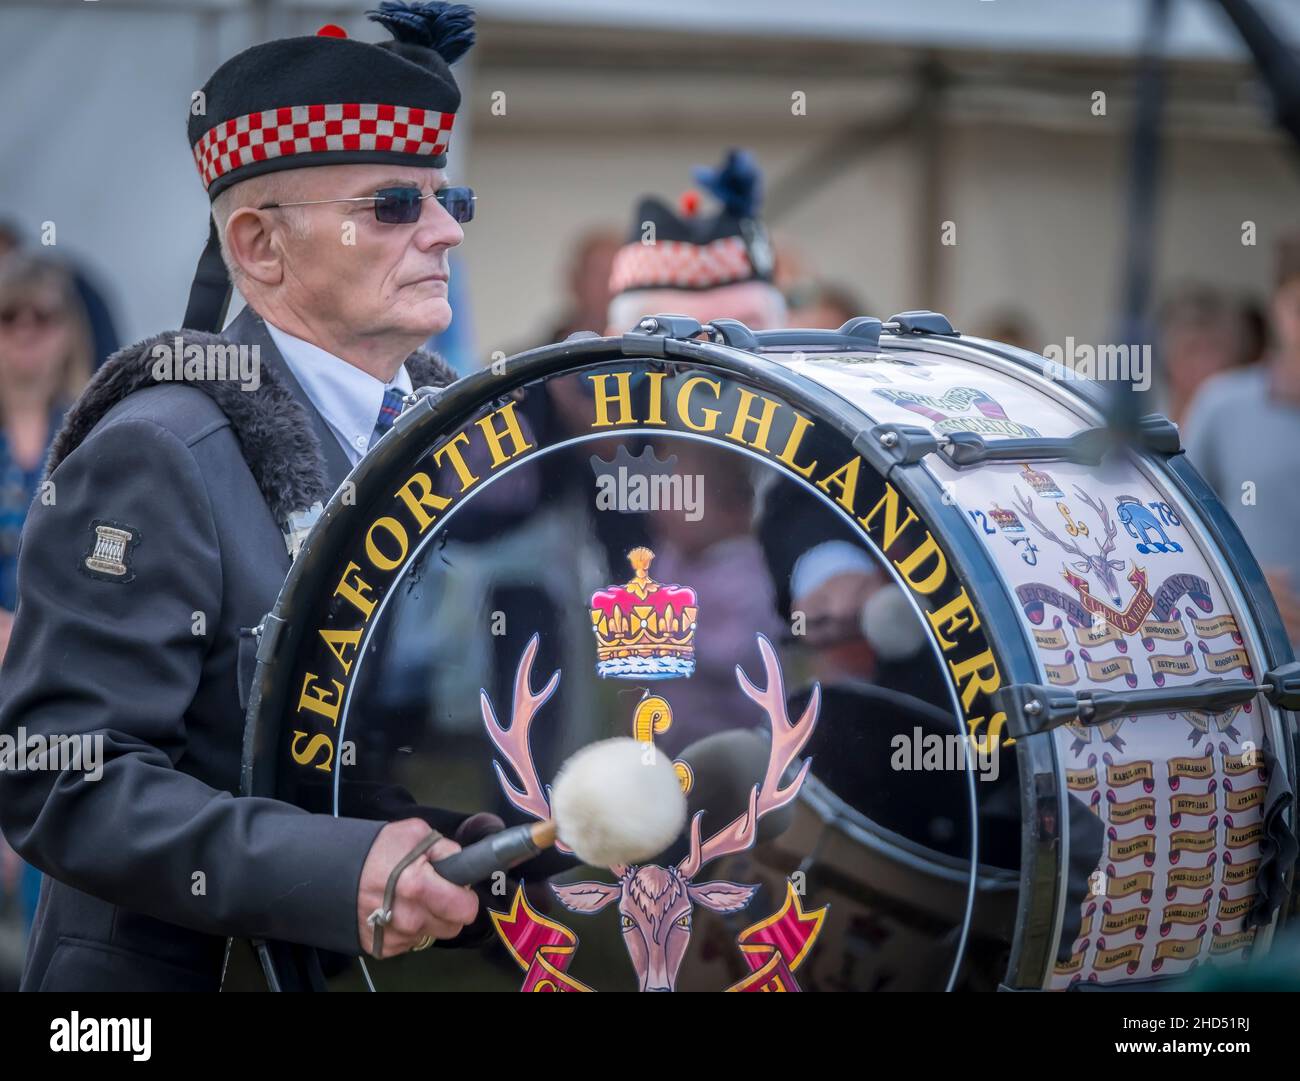 Bass drummer with the Seaforth Highlanders Association. Stock Photo